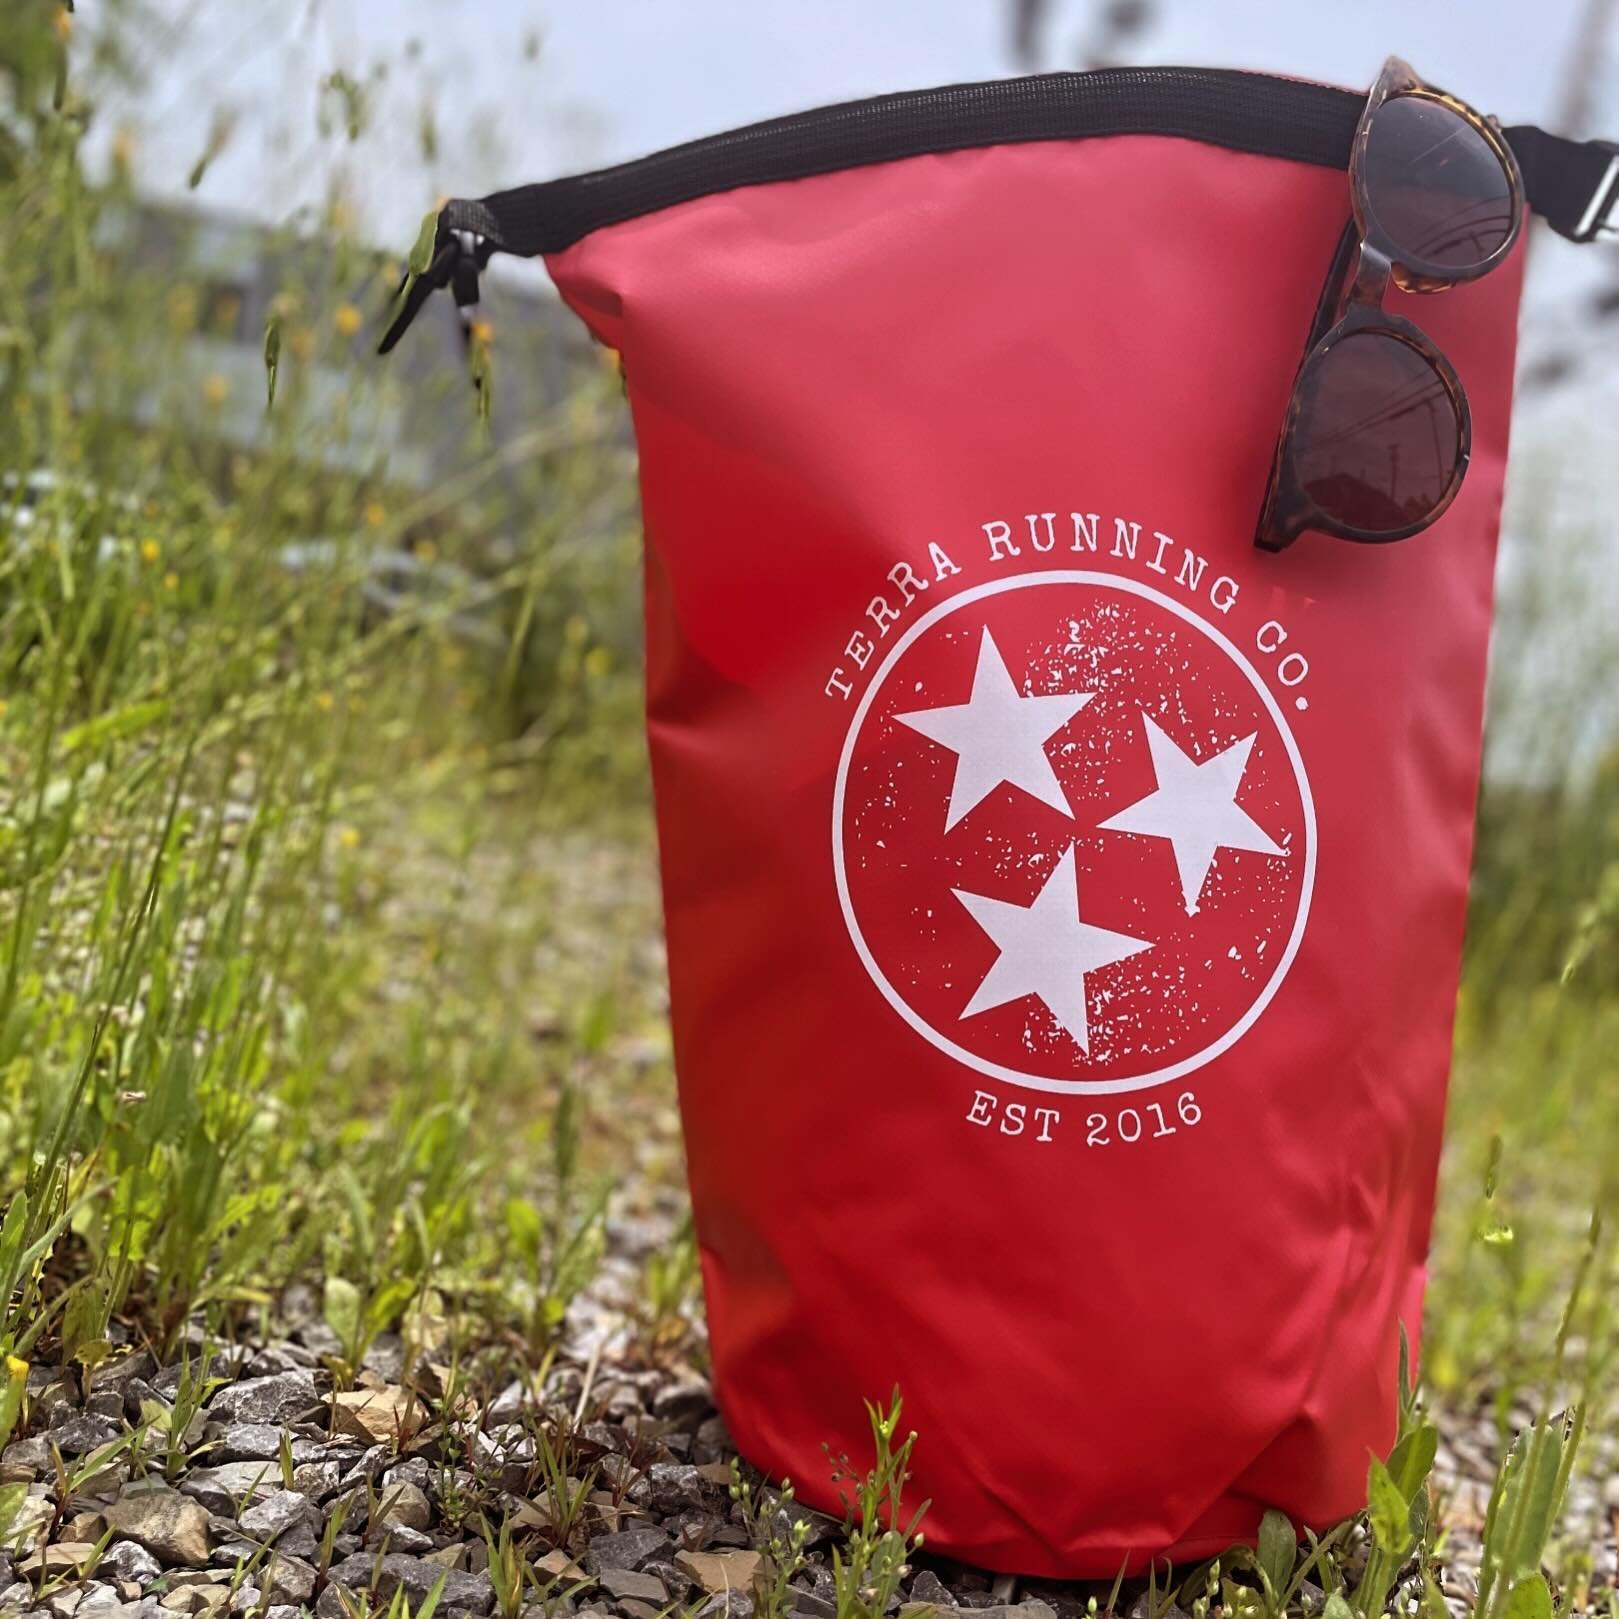 👀 Check out the swag for May&rsquo;s Summer Sizzler! This Tri-Star dry bag is perfect for a day out on the water or for keeping your sweaty clothes contained after a summer workout. And don&rsquo;t forget, complete all 3 5Ks and you&rsquo;ll also ea